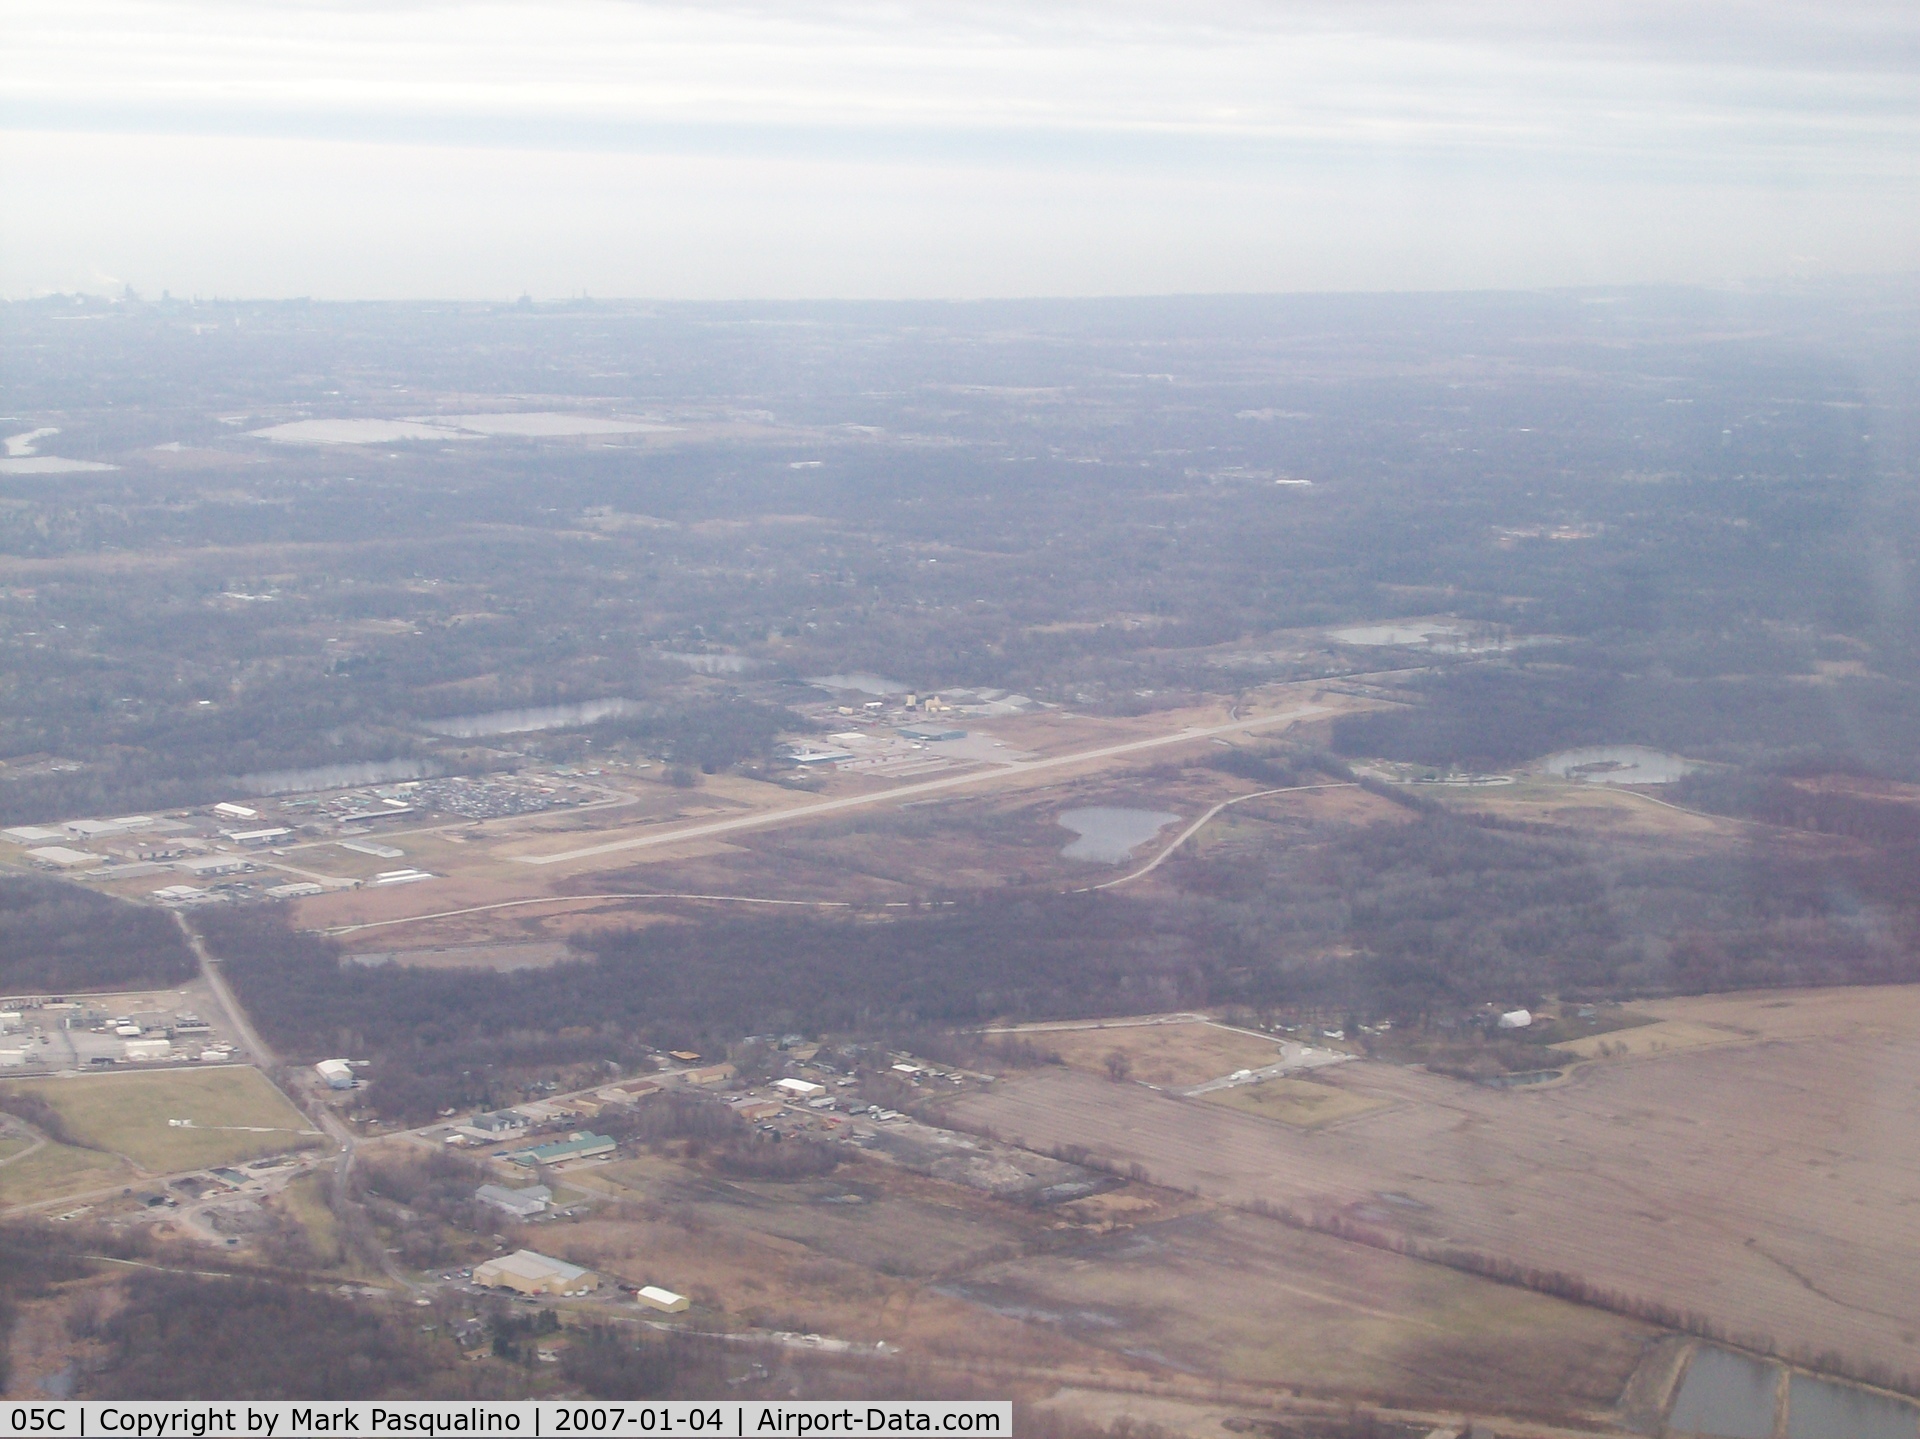 Griffith-merrillville Airport (05C) - Griffith, IN